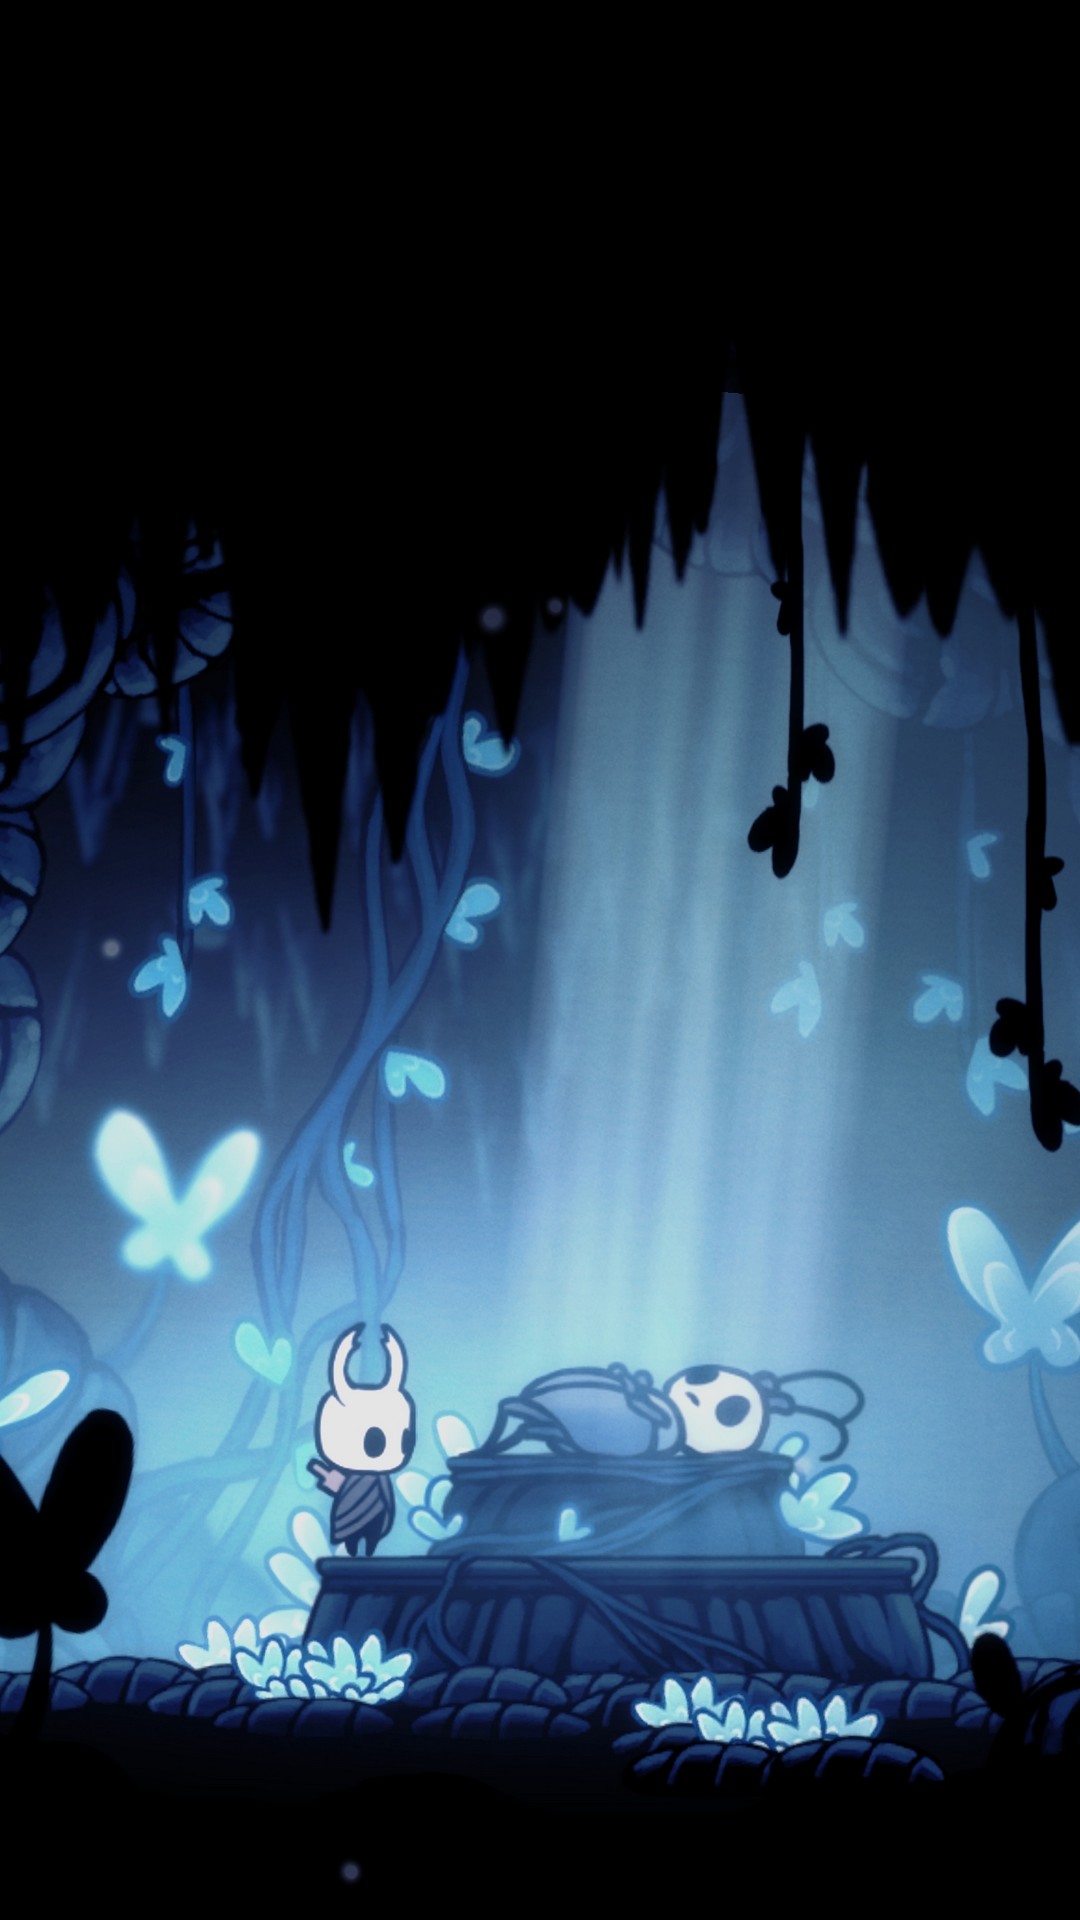 Hollow Knight iPhone 7 Wallpaper With high-resolution 1080X1920 pixel. You can use this wallpaper for your iPhone 5, 6, 7, 8, X, XS, XR backgrounds, Mobile Screensaver, or iPad Lock Screen